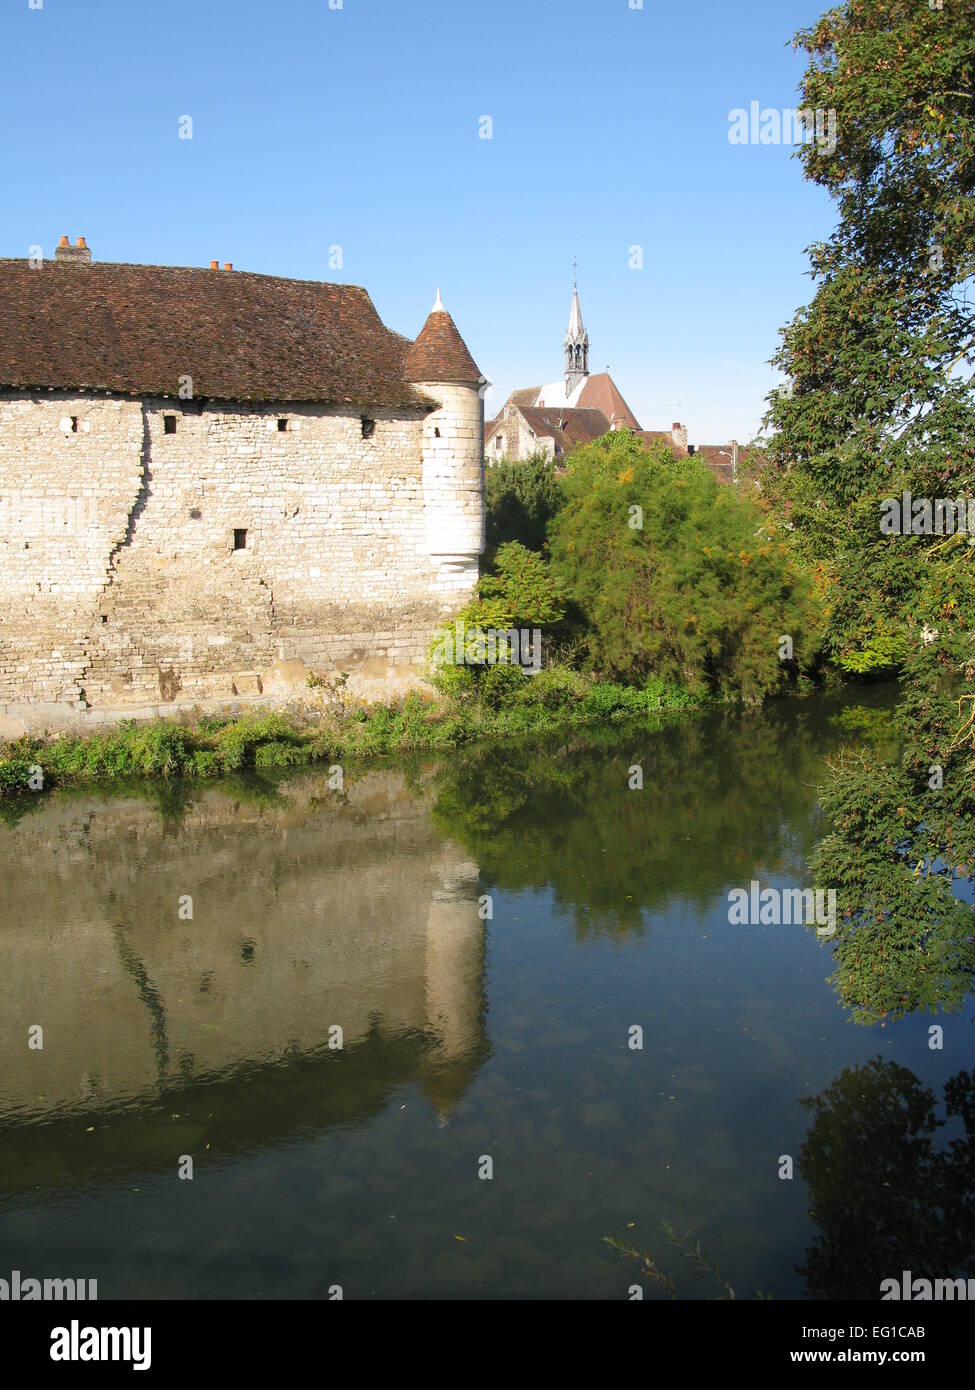 Town of Chablis in Yonne Department in Burgundy Region of France. Famous French wine region. Stock Photo